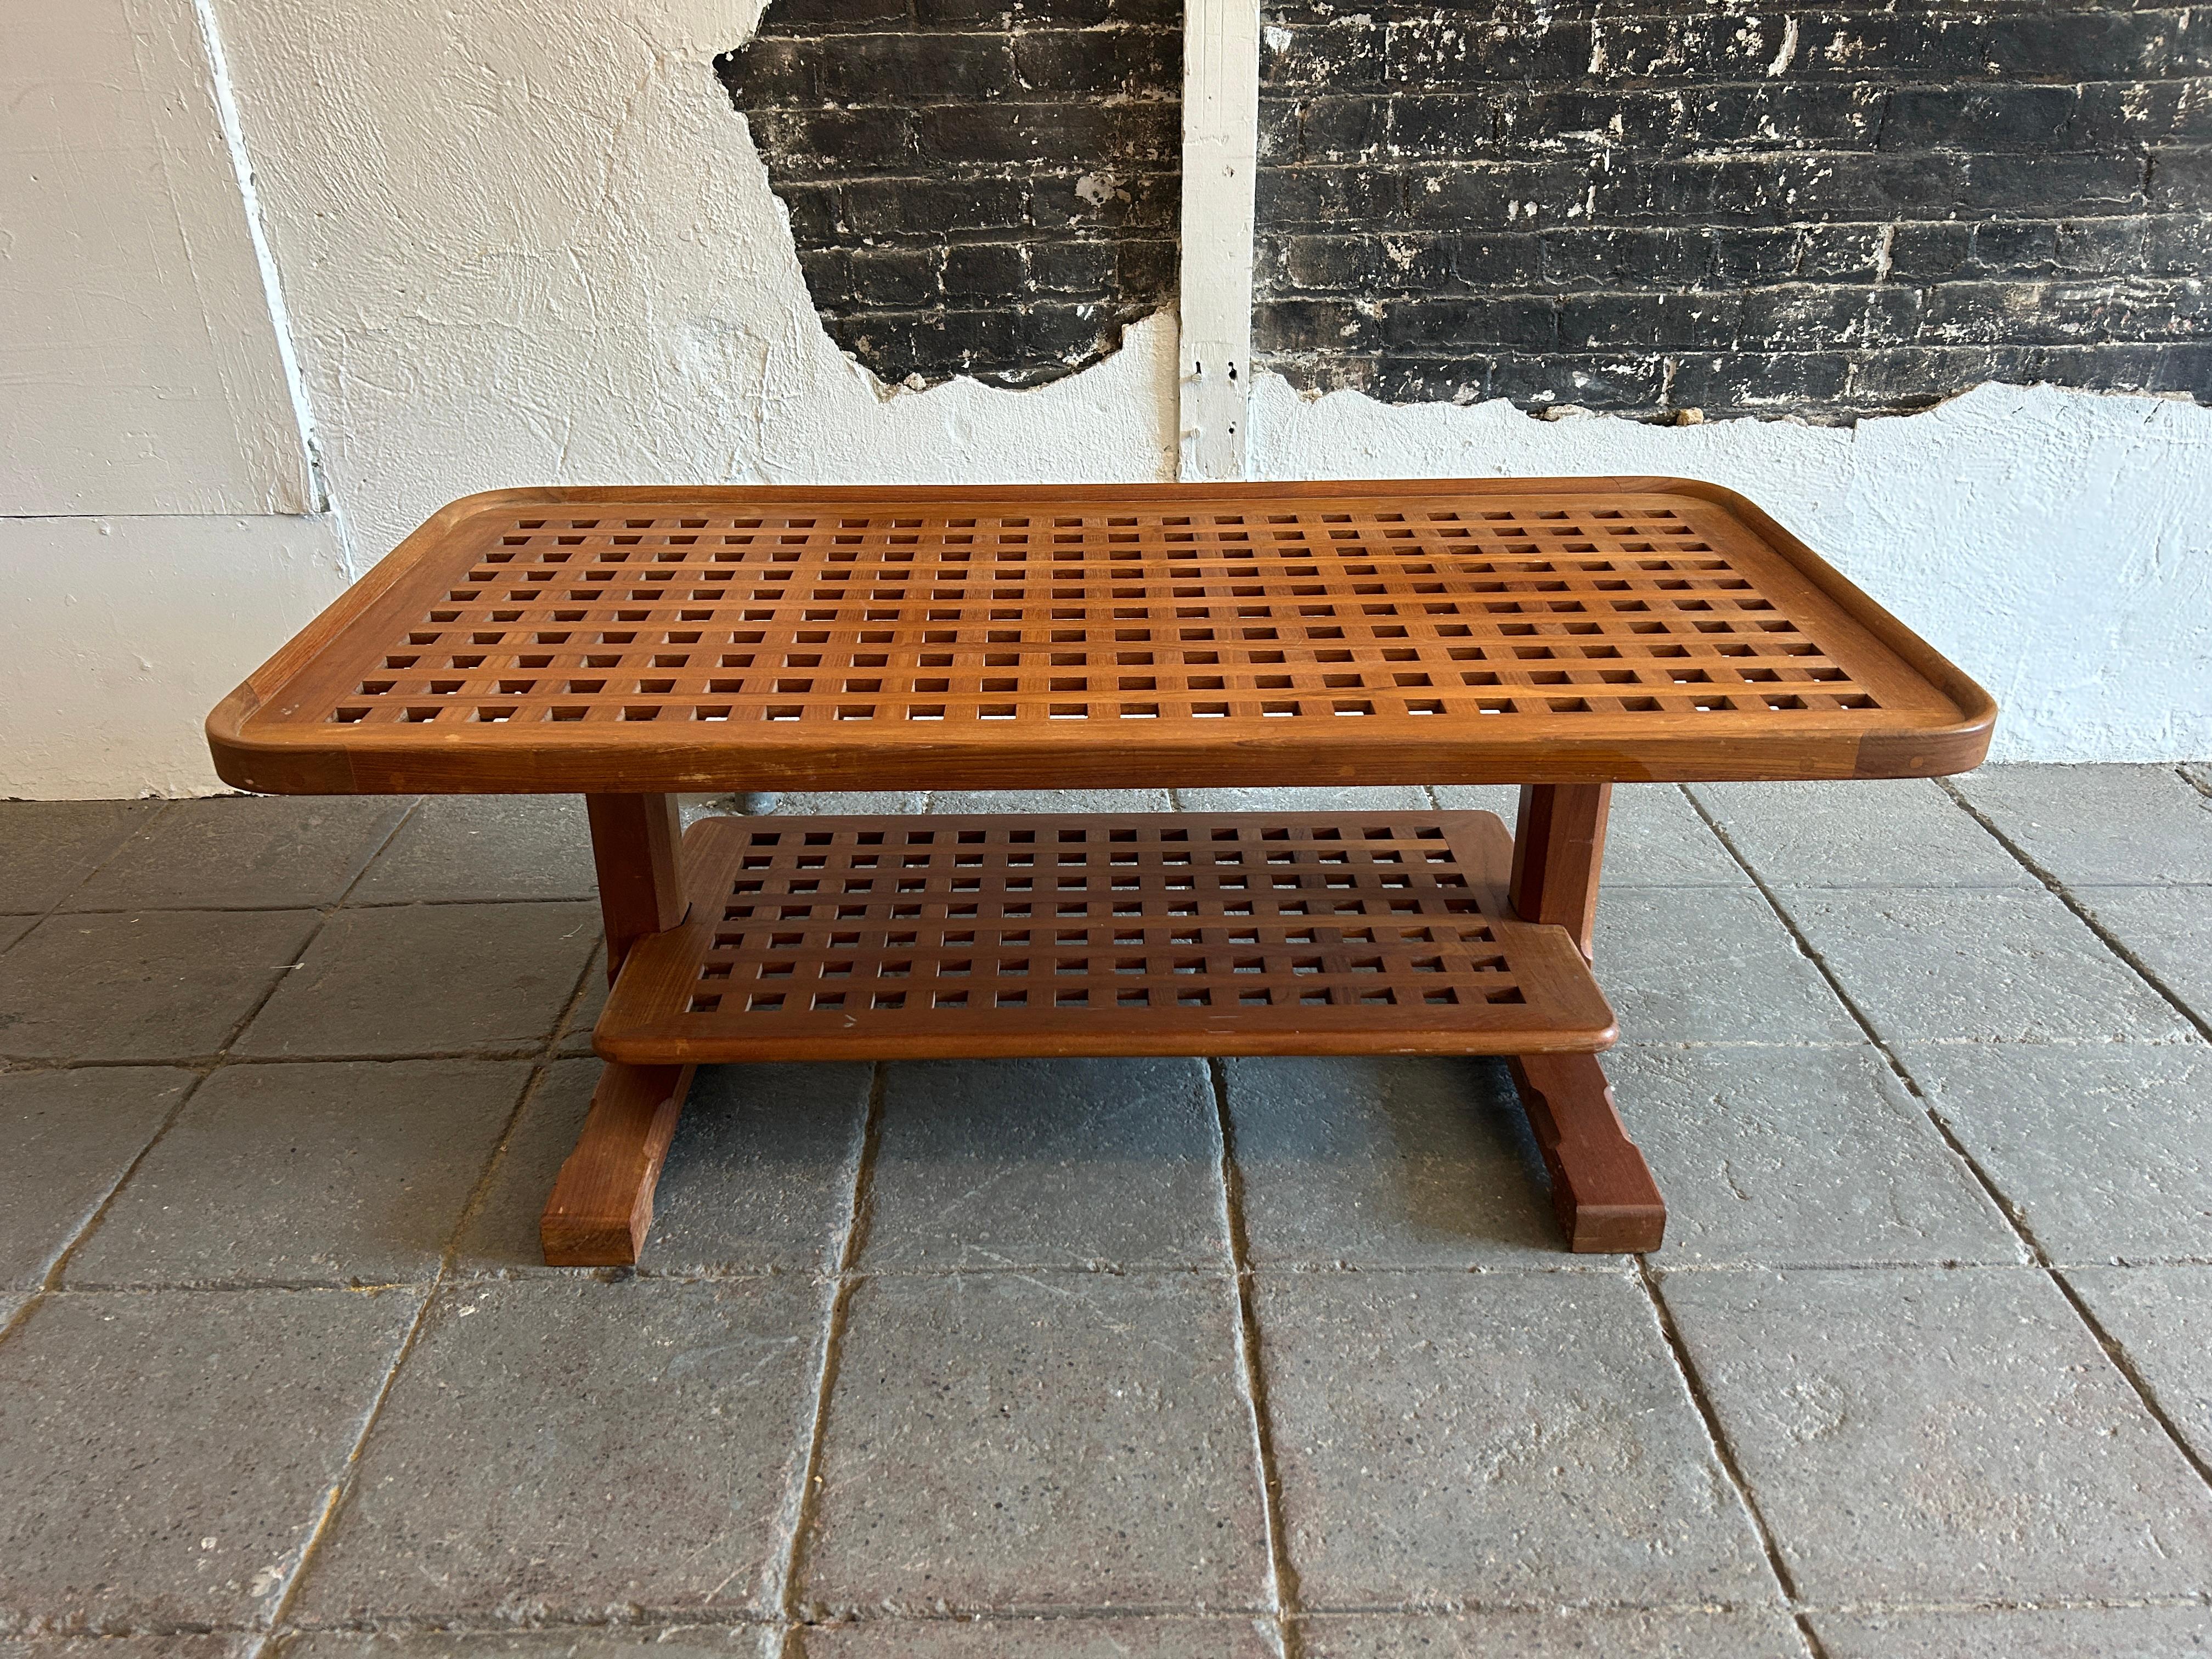 Excellent midcentury Danish Modern solid Teak Lattice 2 tier Coffee Table. Beautiful teak slat lattice and brass screws coffee table. Wonderful design in good vintage condition with a warm teak patina. Lower Shelf is removable. Located In Brooklyn